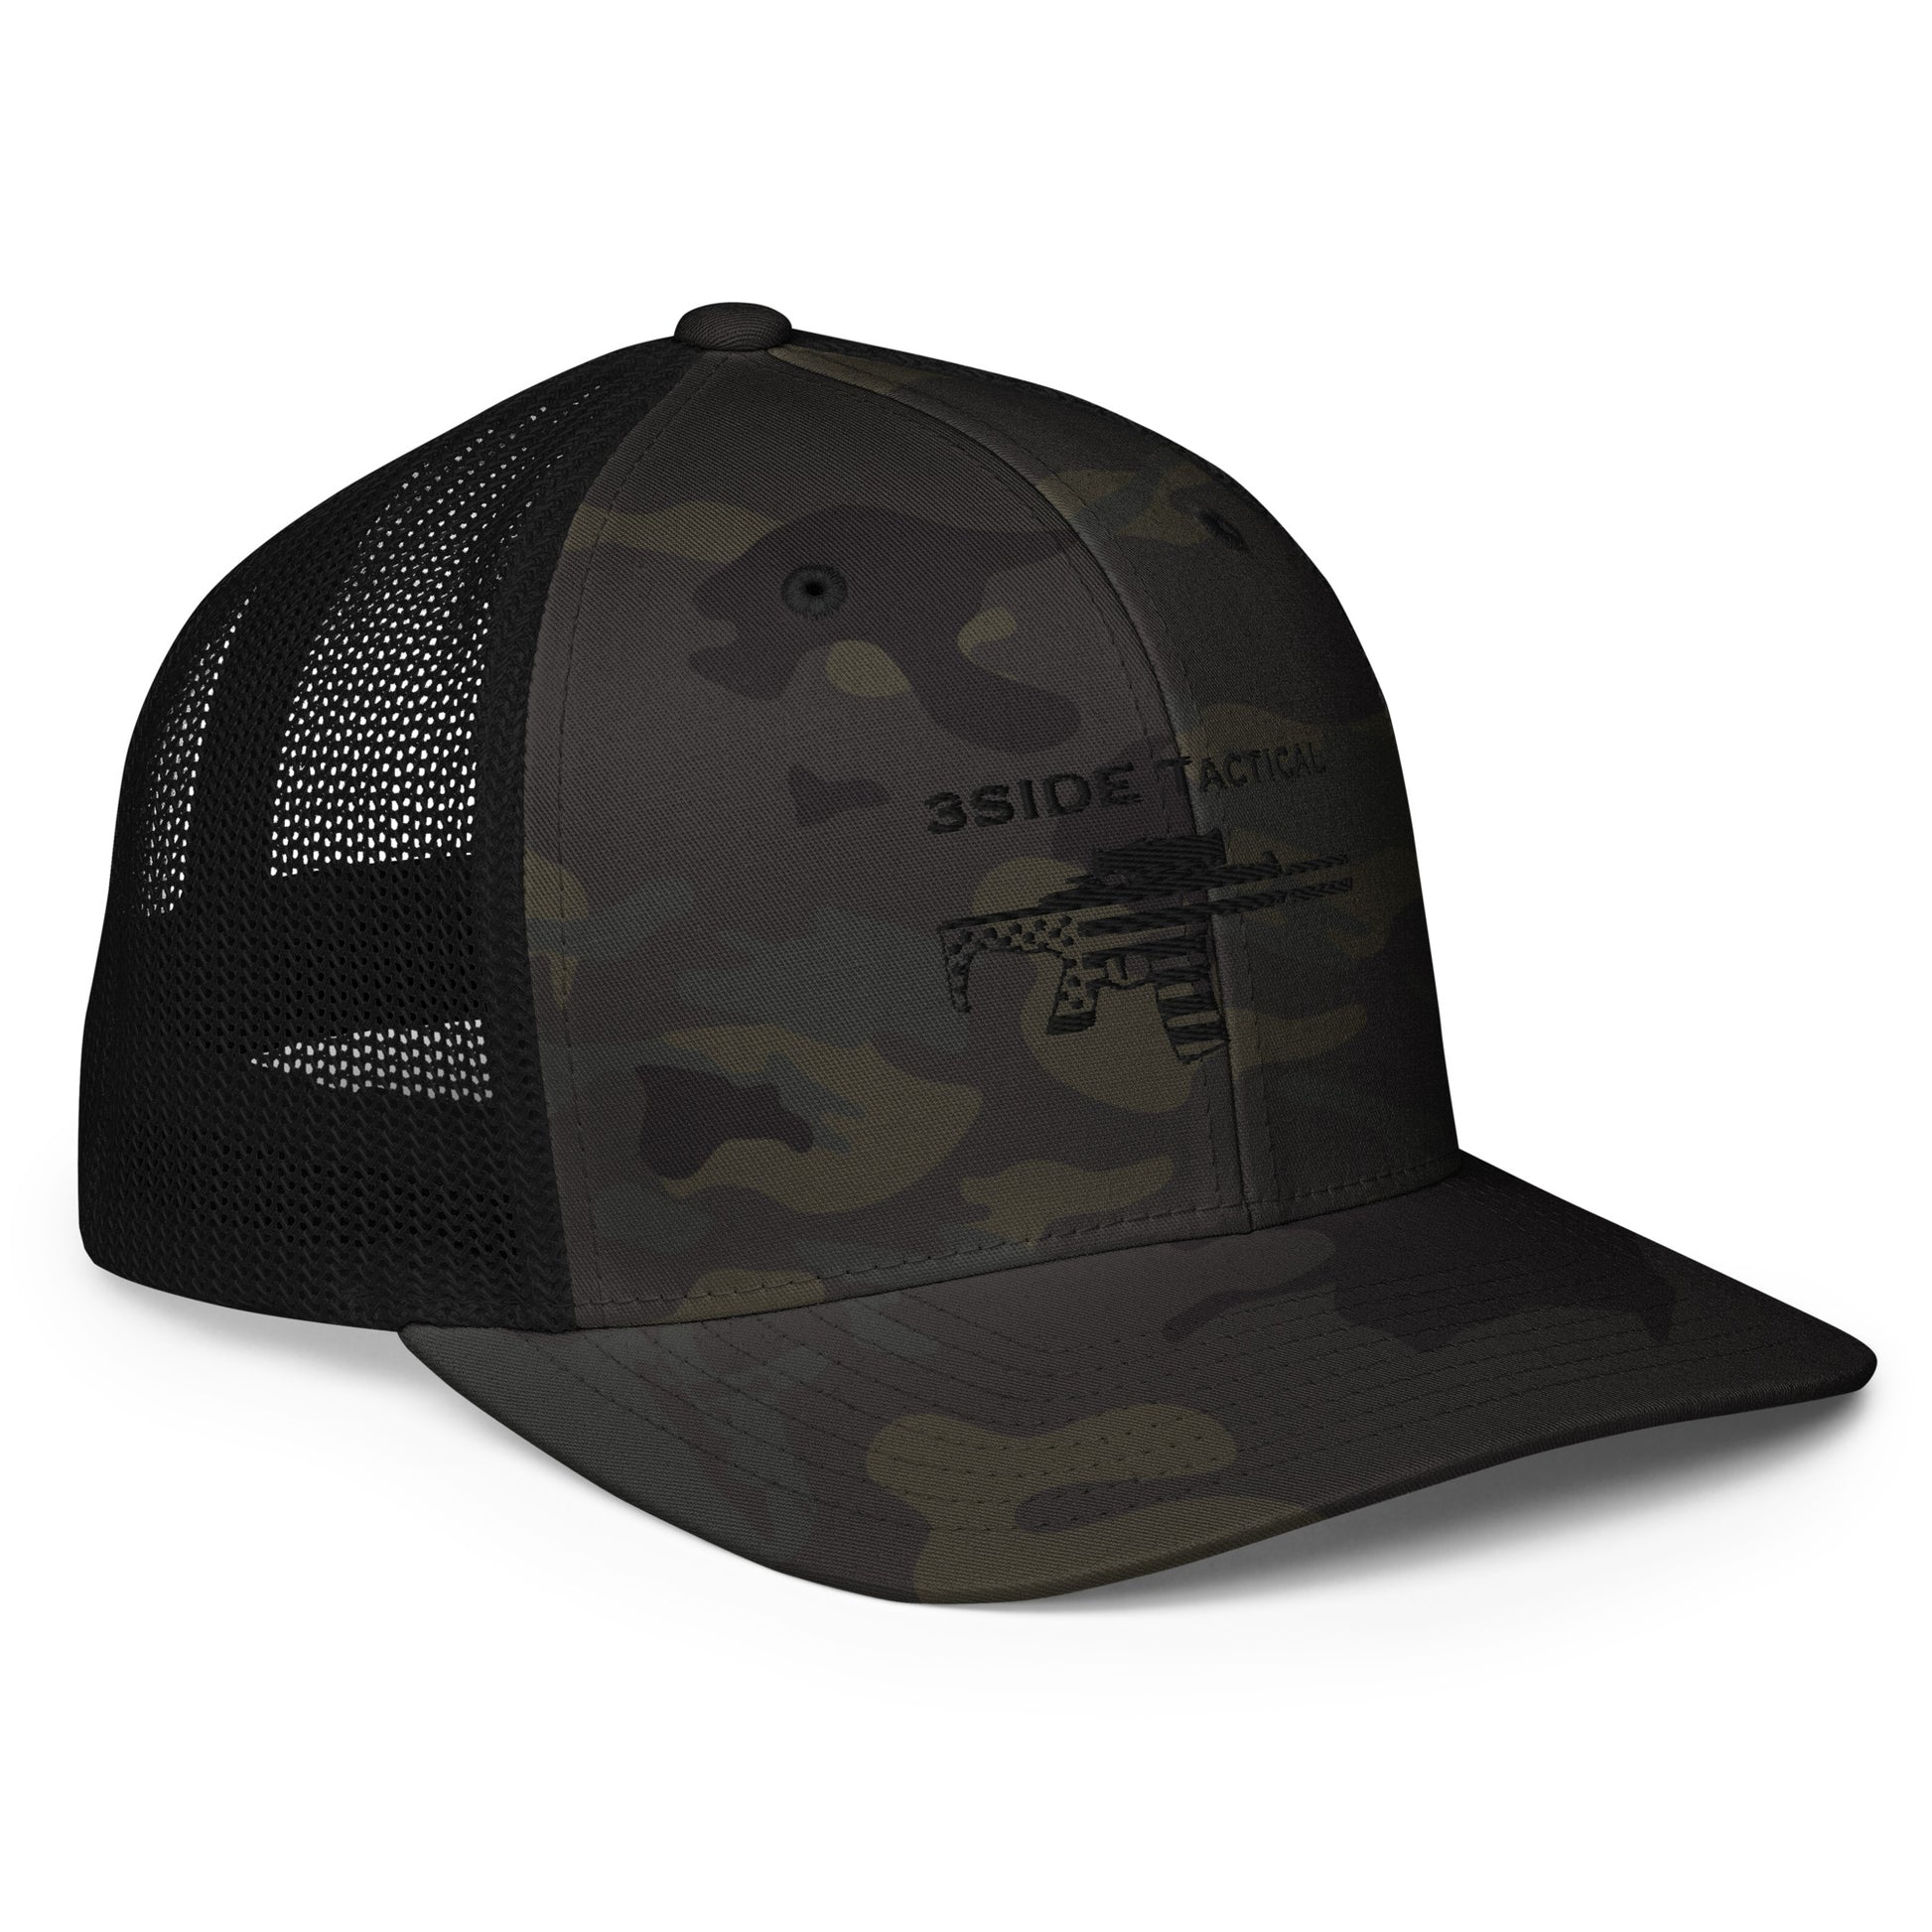 3SIDE RIFLE CLOSED BACK TRUCKER CAP – 3SIDE tactical